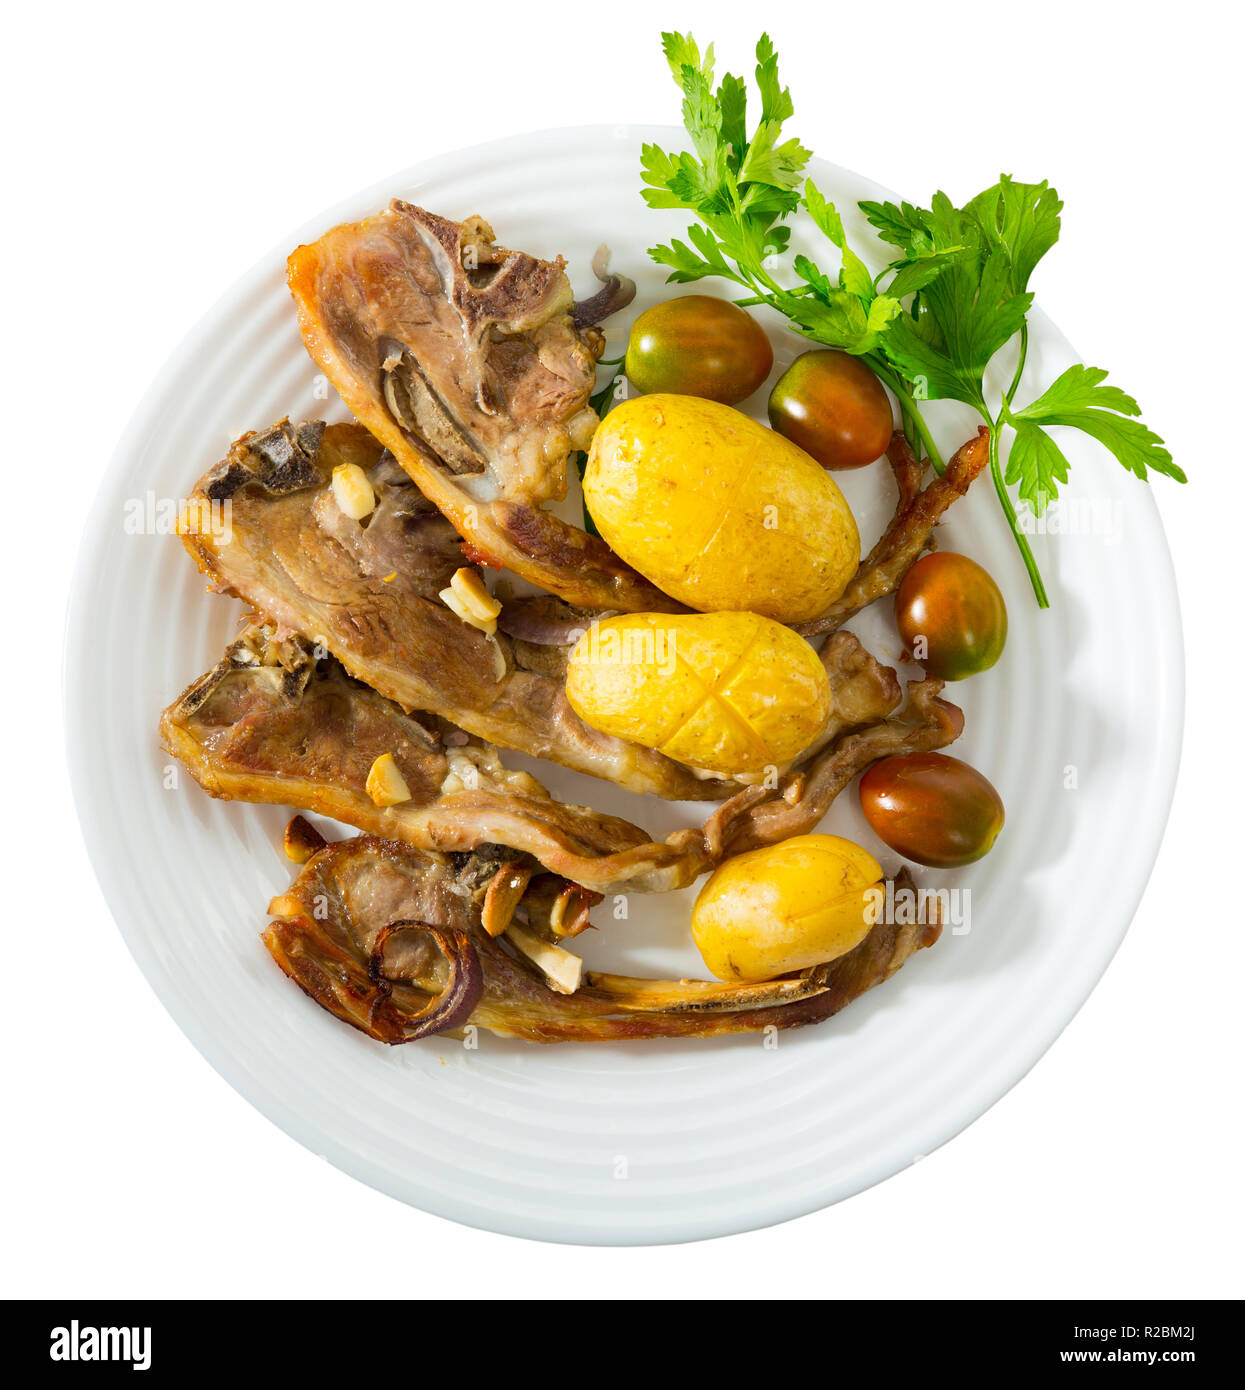 Slow cooked mouton ribs with potato, spanish plate Costillas de cordero. Isolated over white background Stock Photo